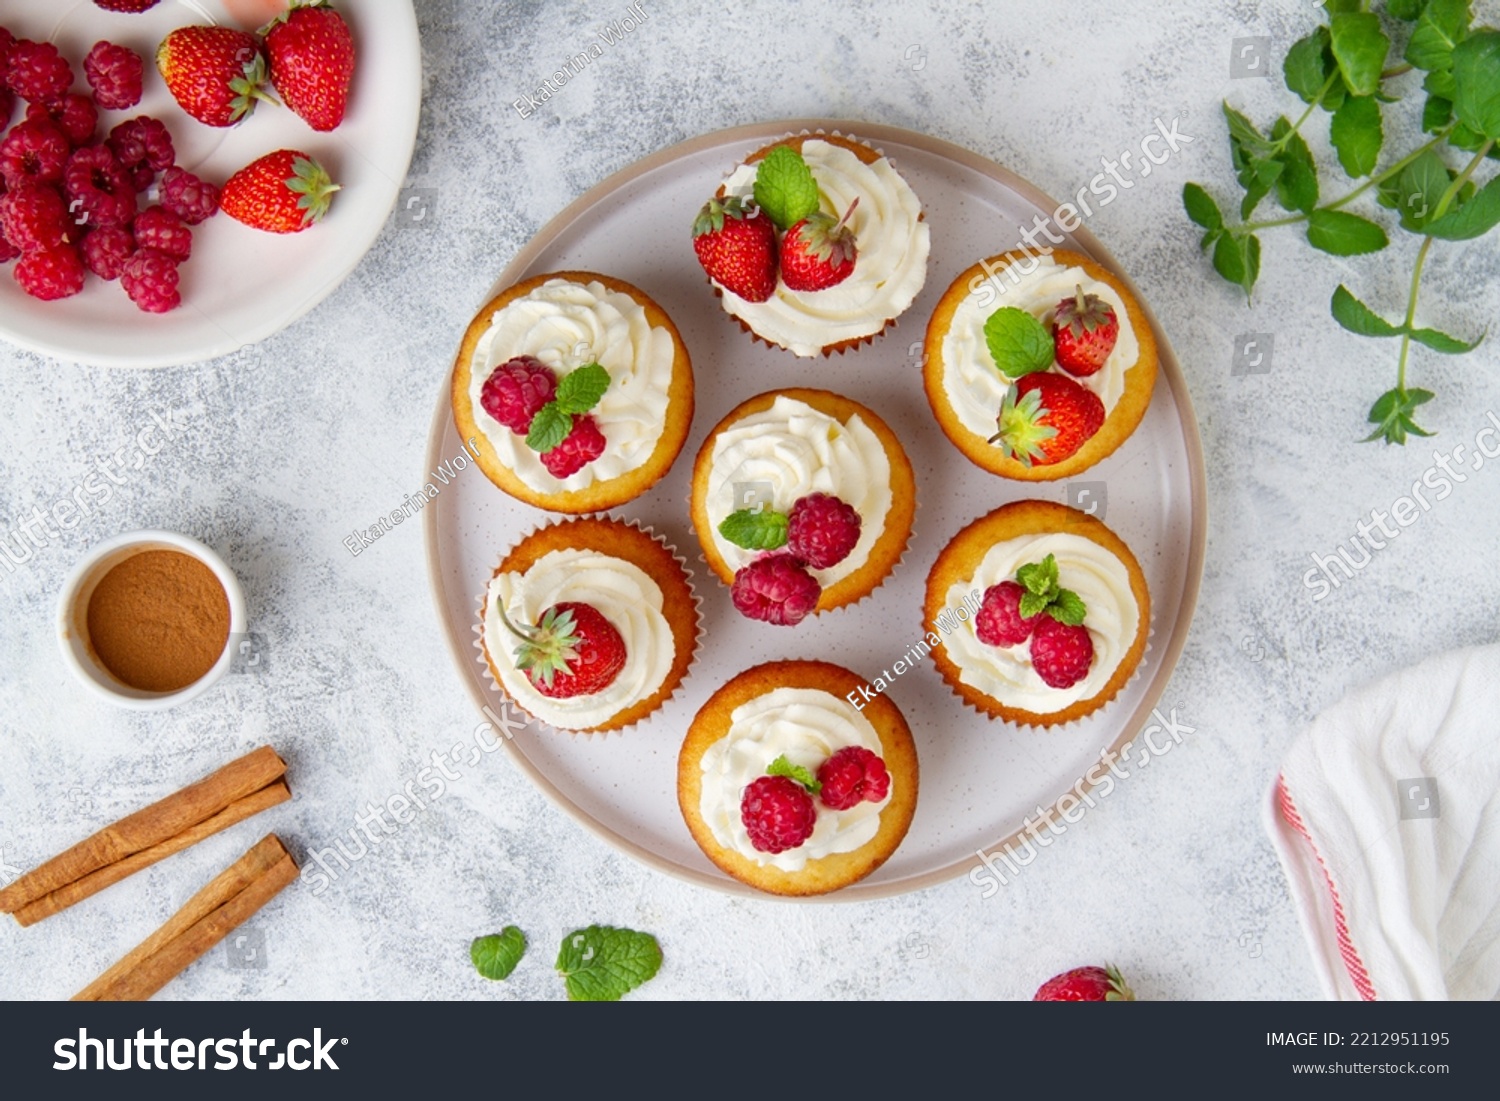 Cupcakes with raspberries and strawberries on a plate on a concrete background, top view #2212951195